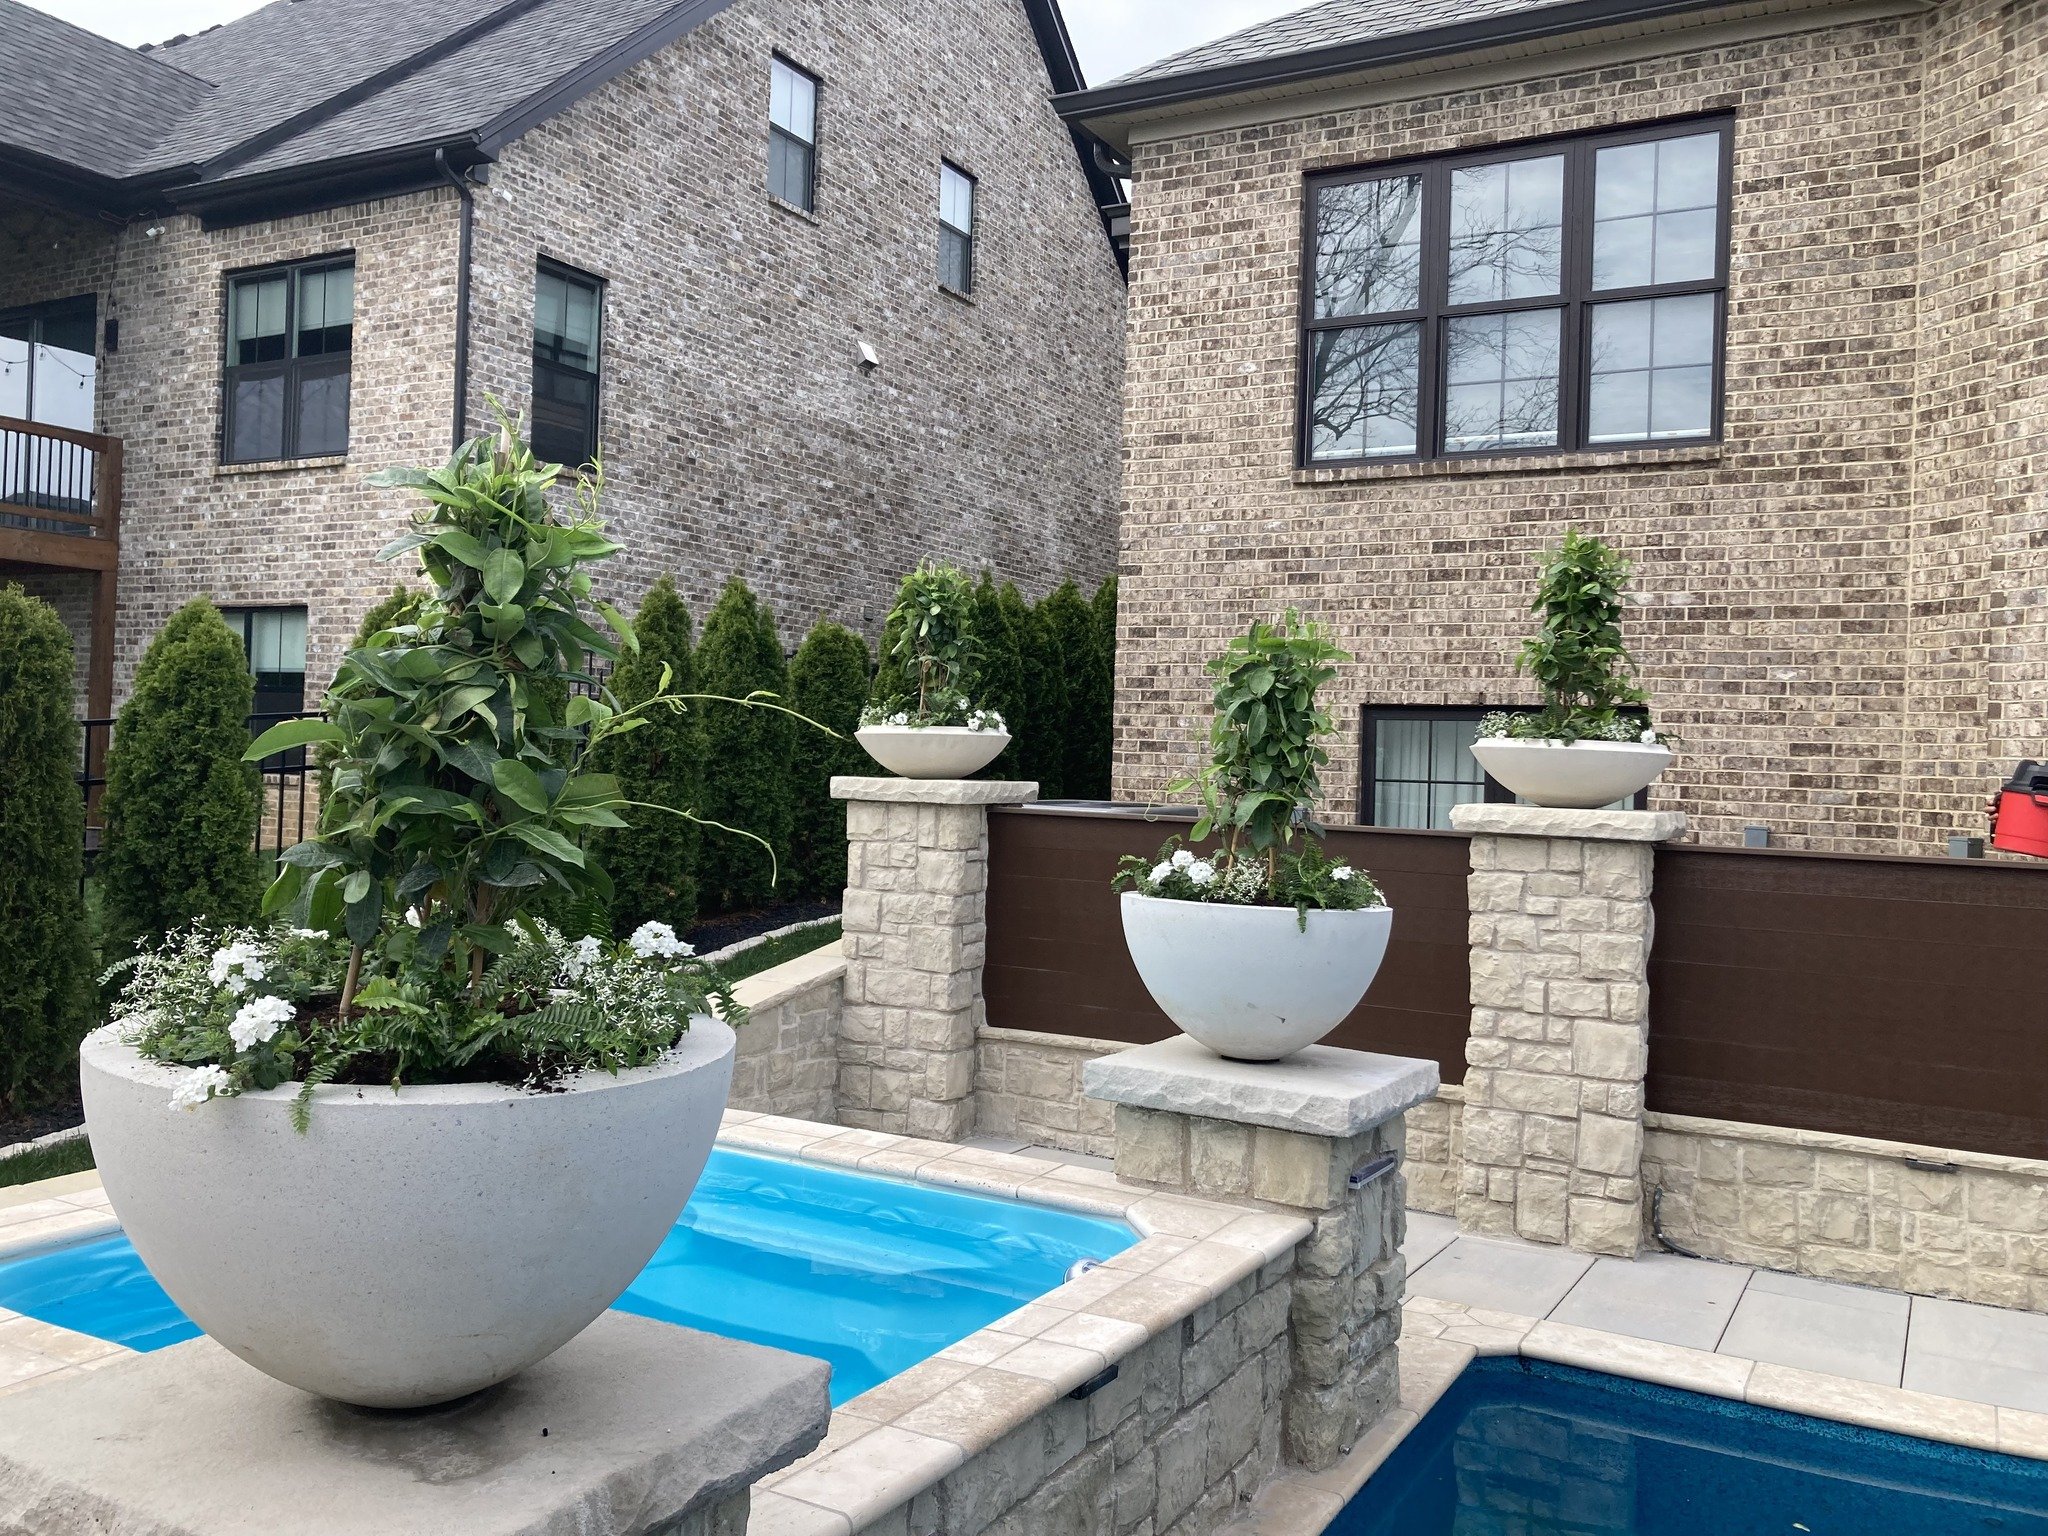 These custom cement pots full of luscious plants are just what was needed to finish up our latest pool project.

#customlandscape 
#swimmingpool 
#swimmingpooltime 
#outdoorliving 
#backyardoasis 
#BackyardDesign